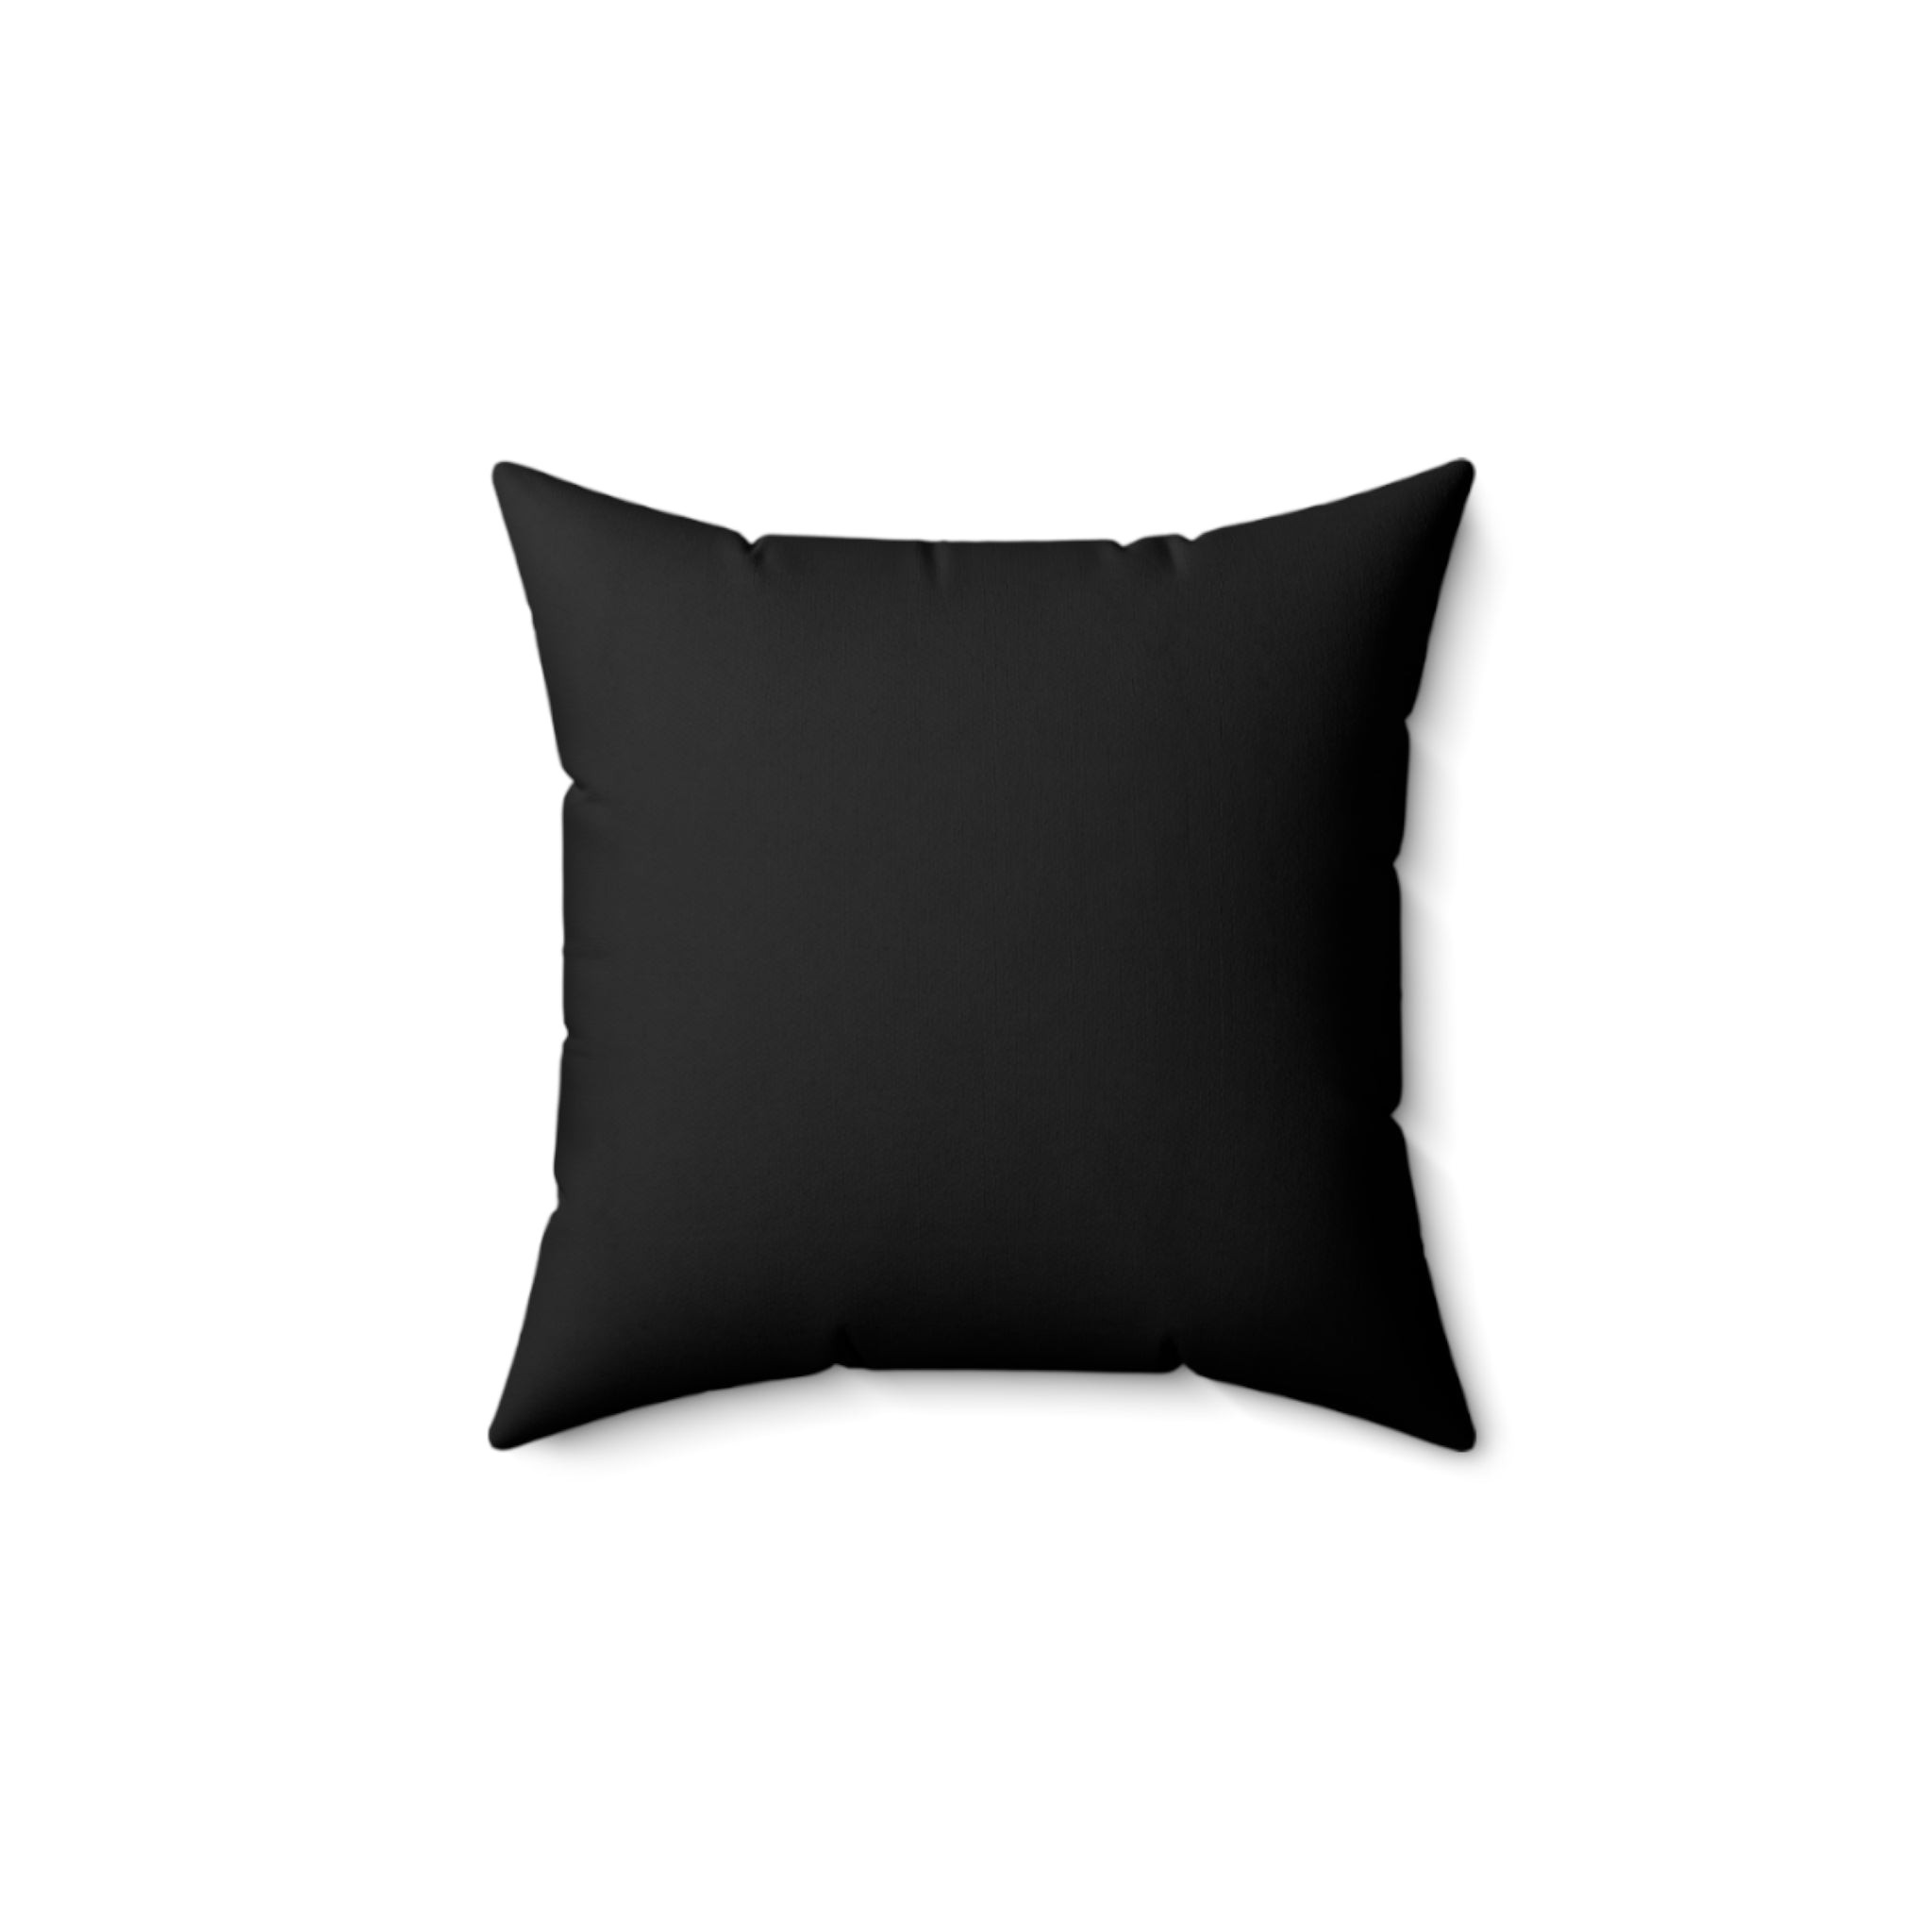 Phantom Butterfly Faux Suede Pillow Cover: Black and White